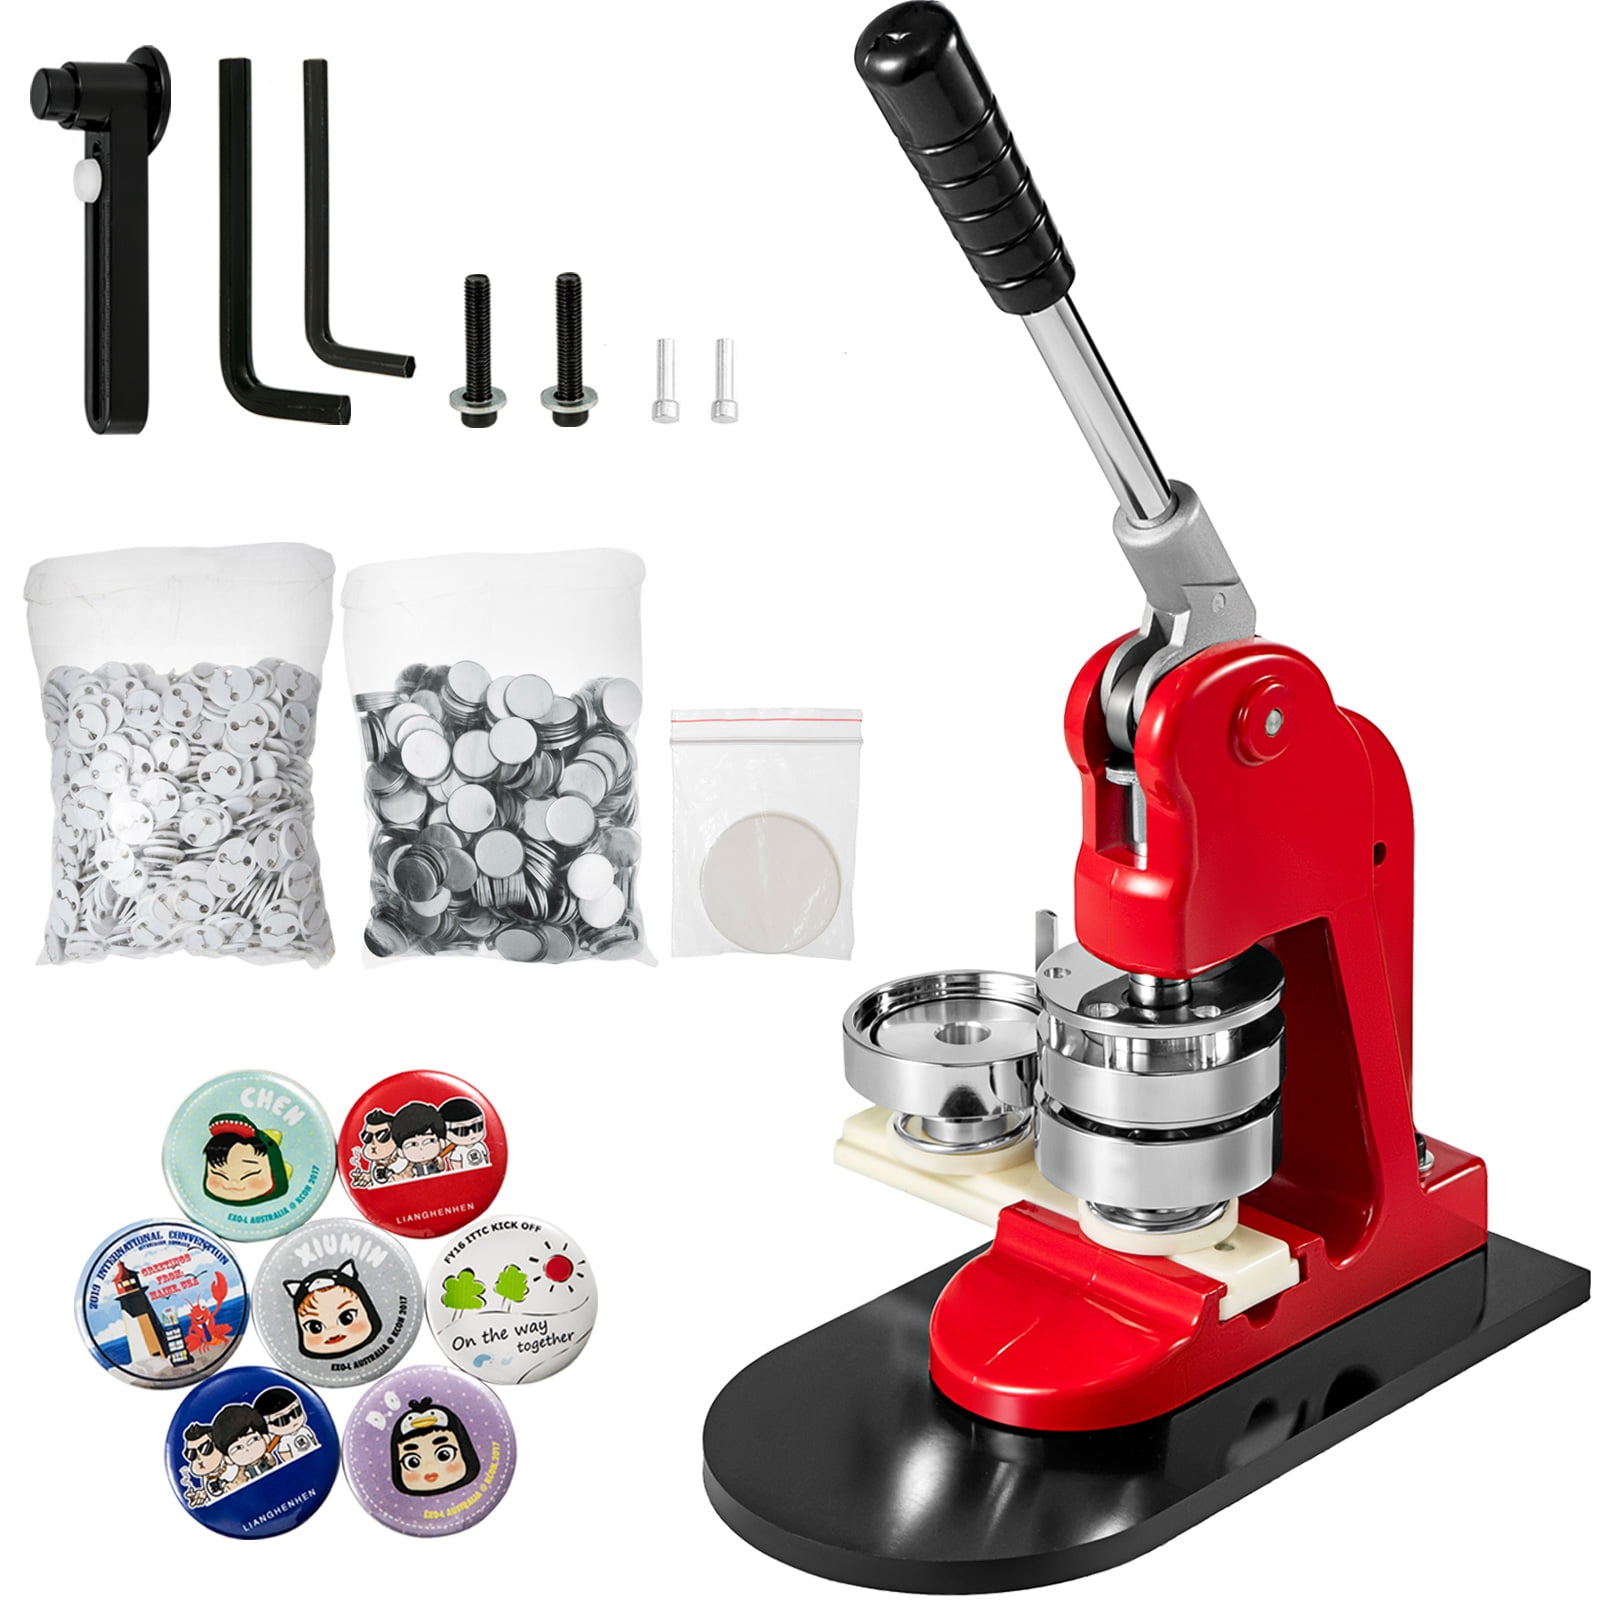  Mryitcal Button Maker Machine Multiple Sizes, 1''+1.25''+2.25''  Pin Maker Button Press Machine W/300 Sets Metal Pinback Button Parts, Badge  Button Machine for DIY Photo badge, Team Badge, Party Favors